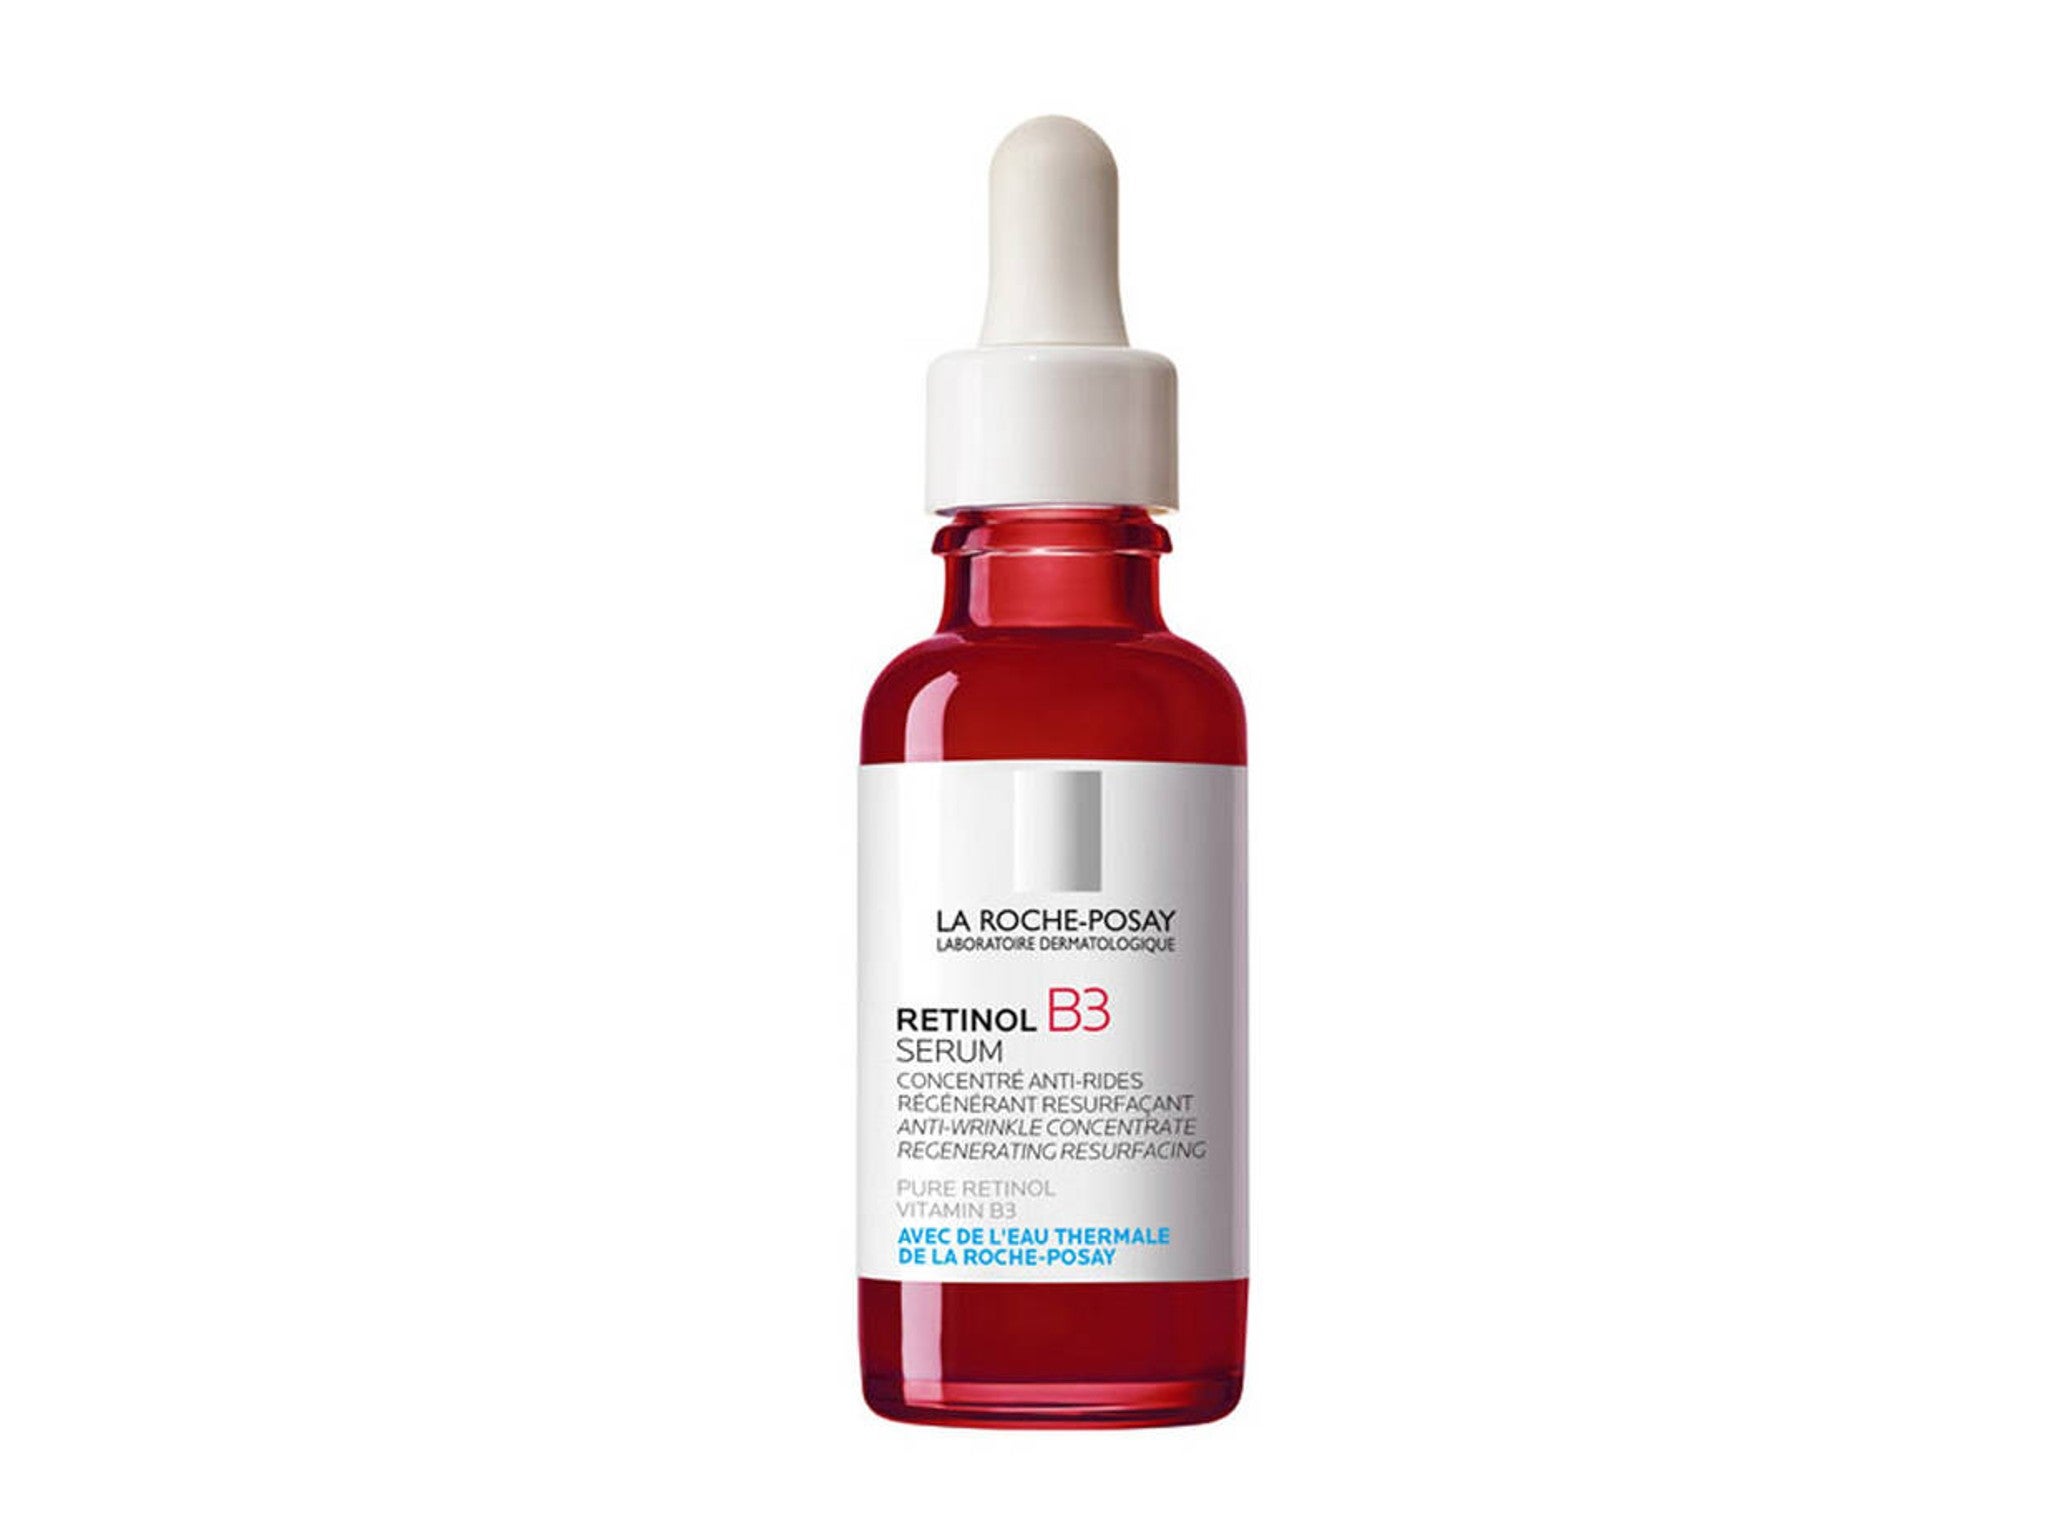 Formulated to tackle the visible signs of ageing, this formula contains 0.3 per cent retinol